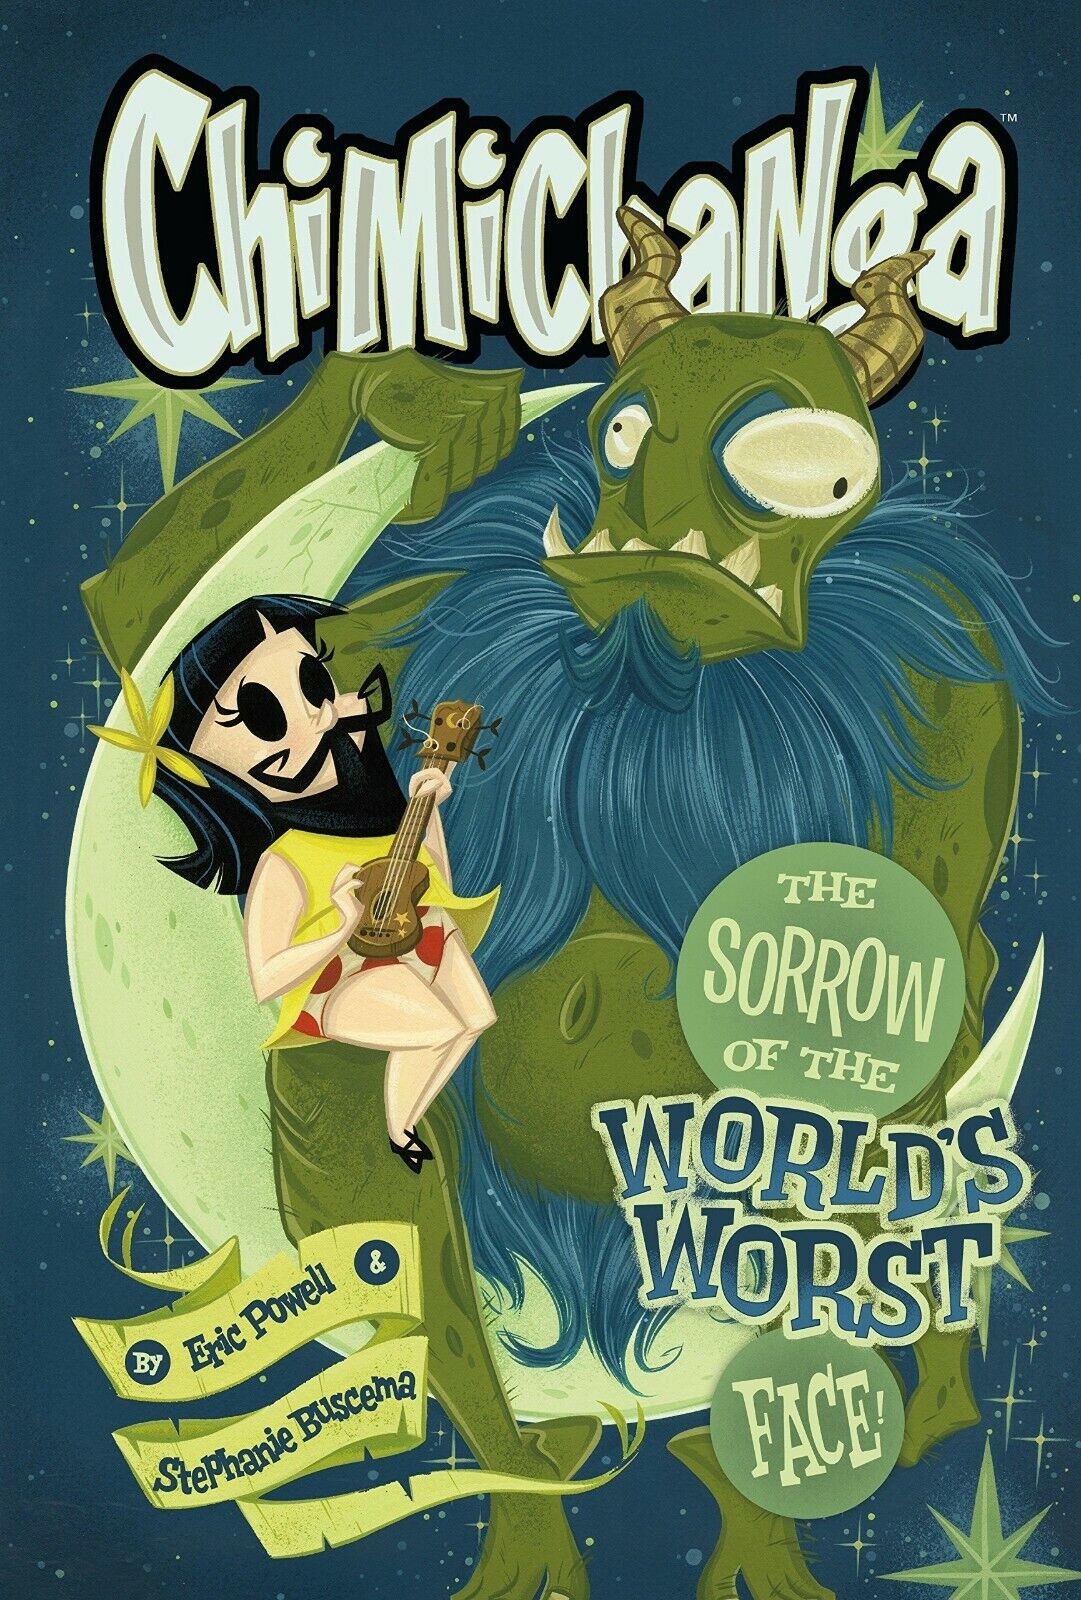 Chimichanga Sorrow of World\'s Worst Face Hardcover GN Eric Powell Buscema New NM